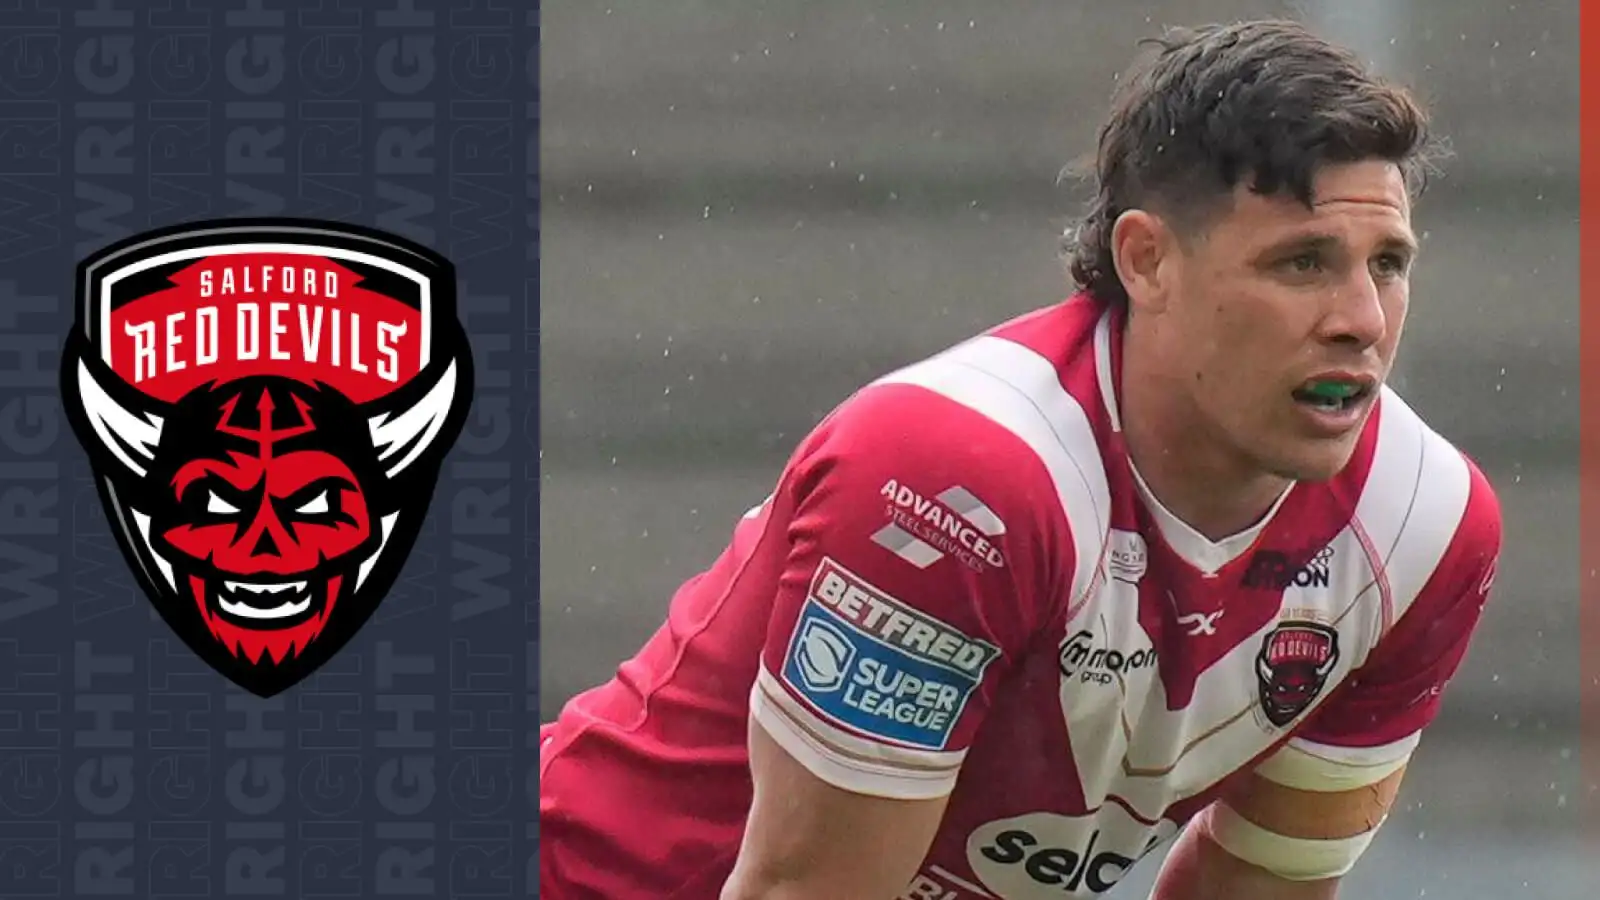 Salford Red Devils contract news: Key forward signs long-term deal in ‘massive coup’ for club